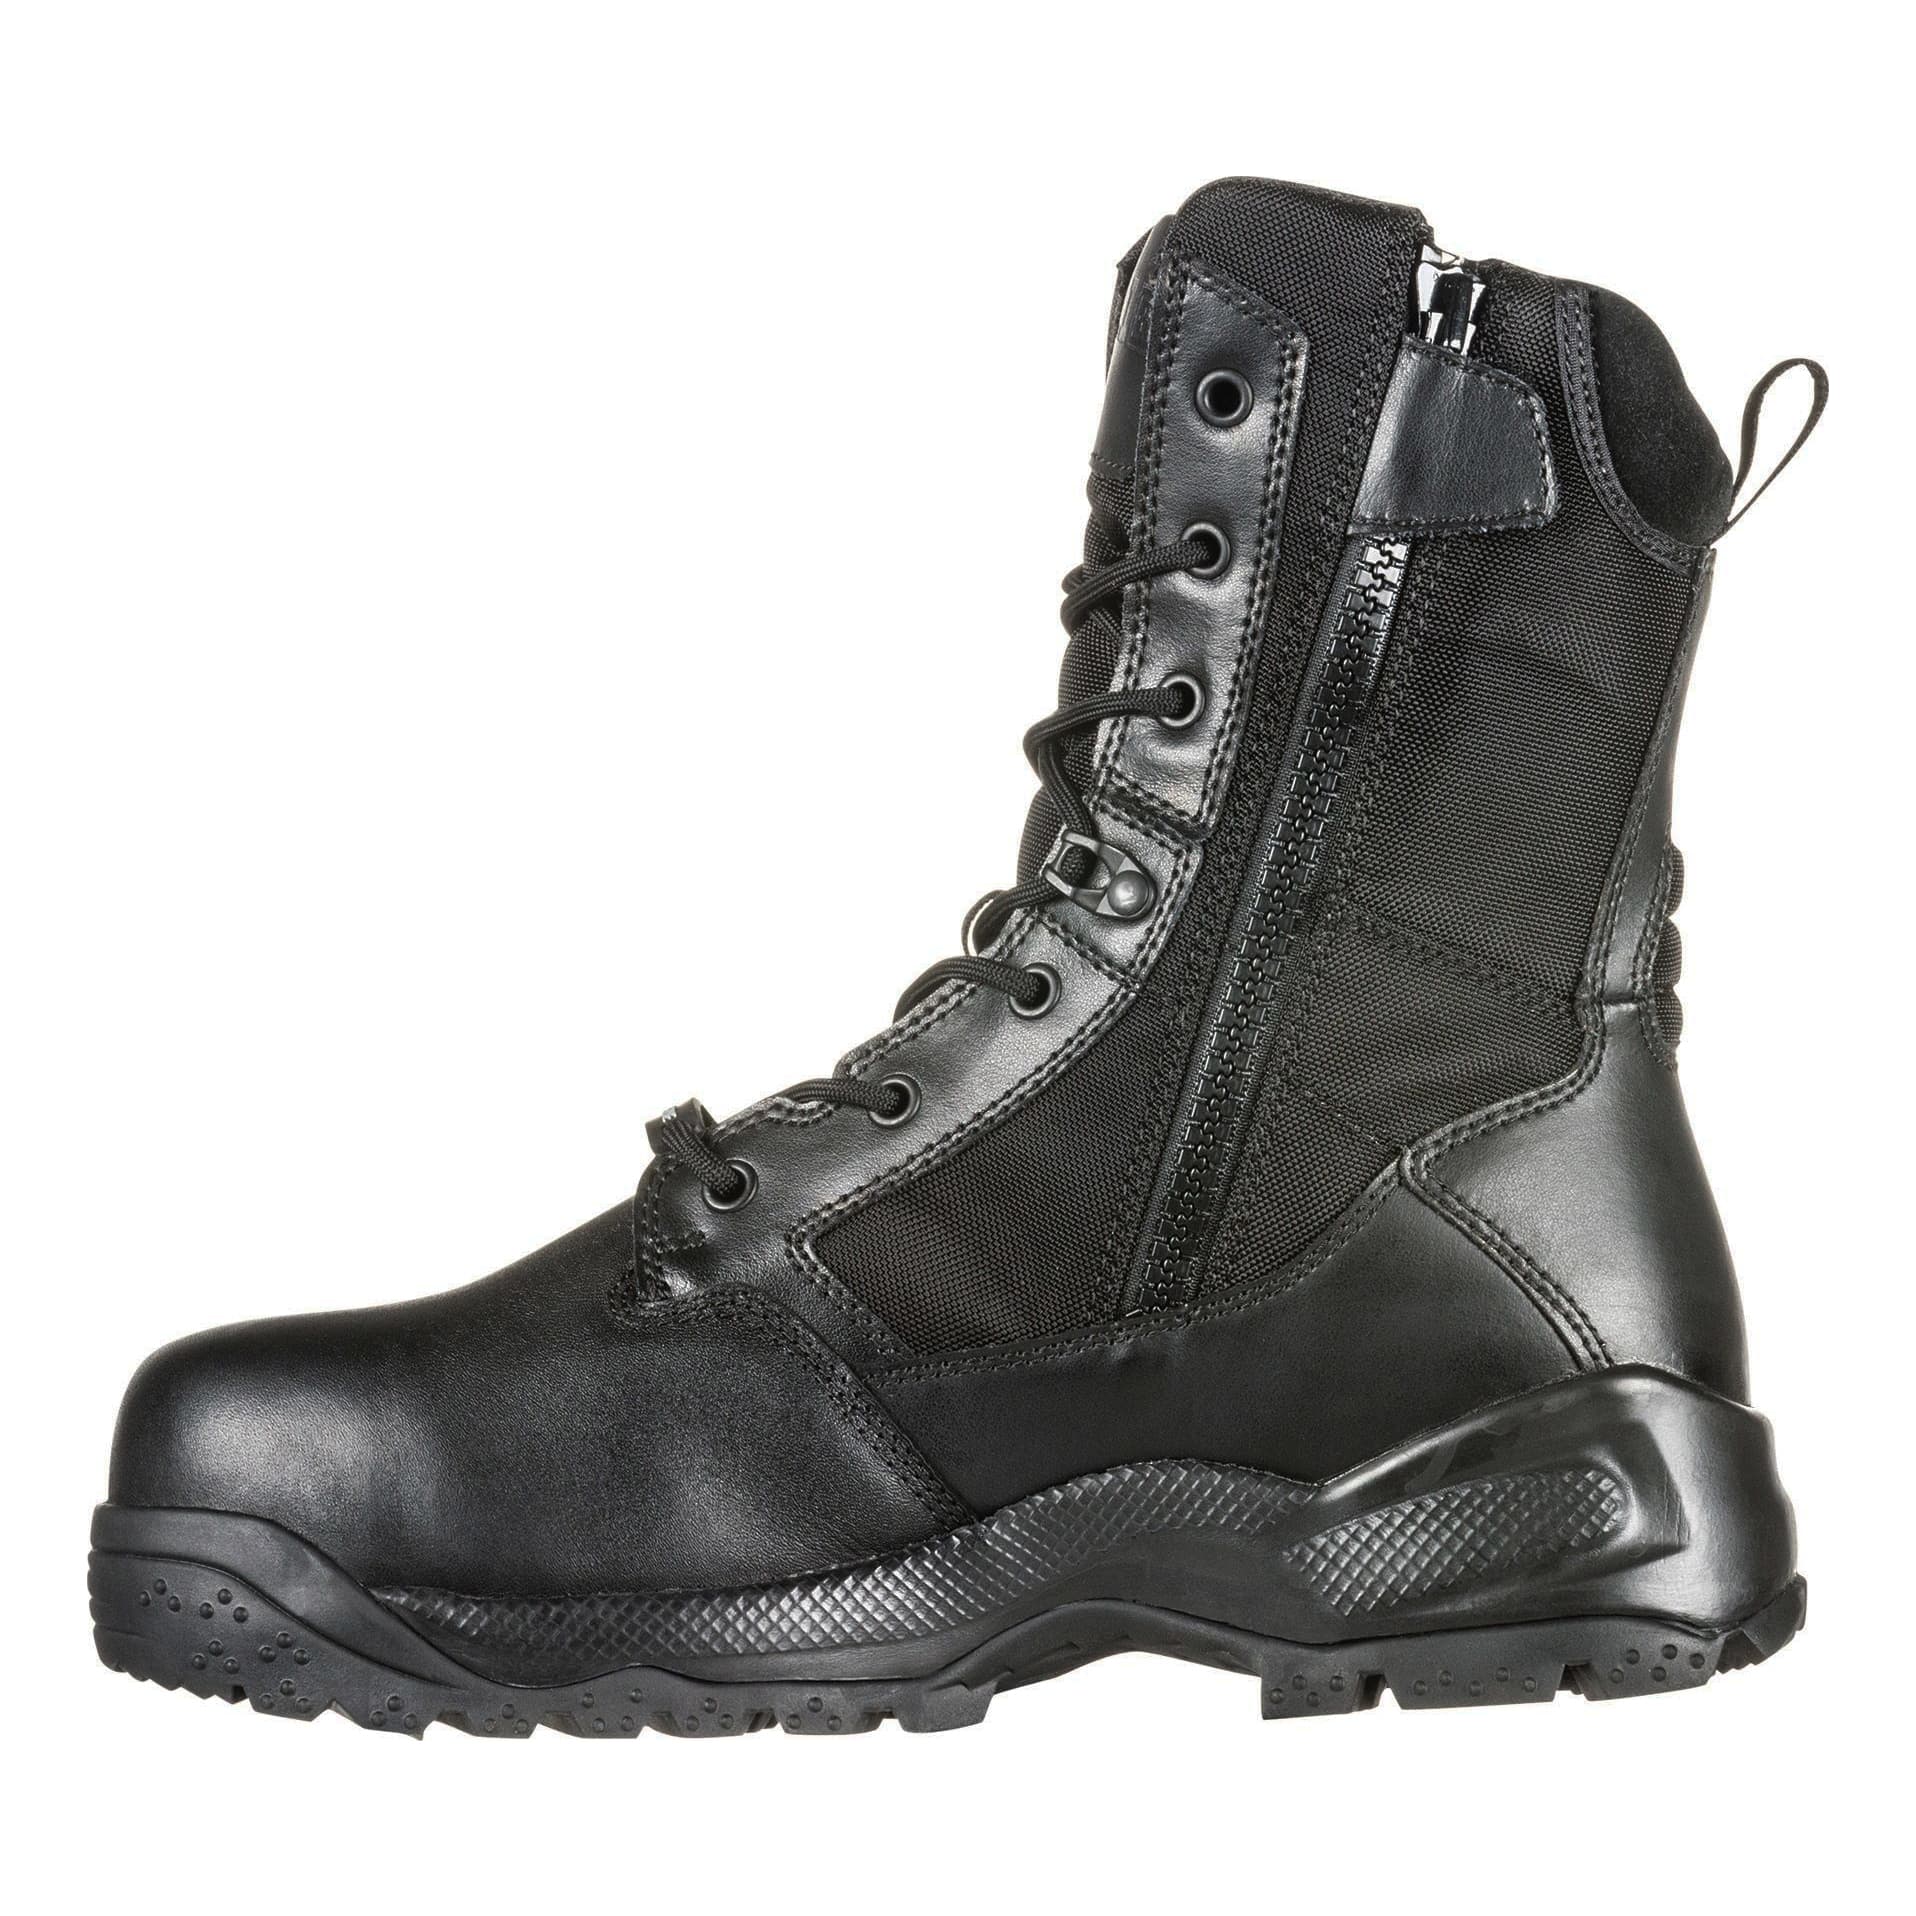 5.11® A.T.A.C.® 2.0 8" Shield Boot - inner side